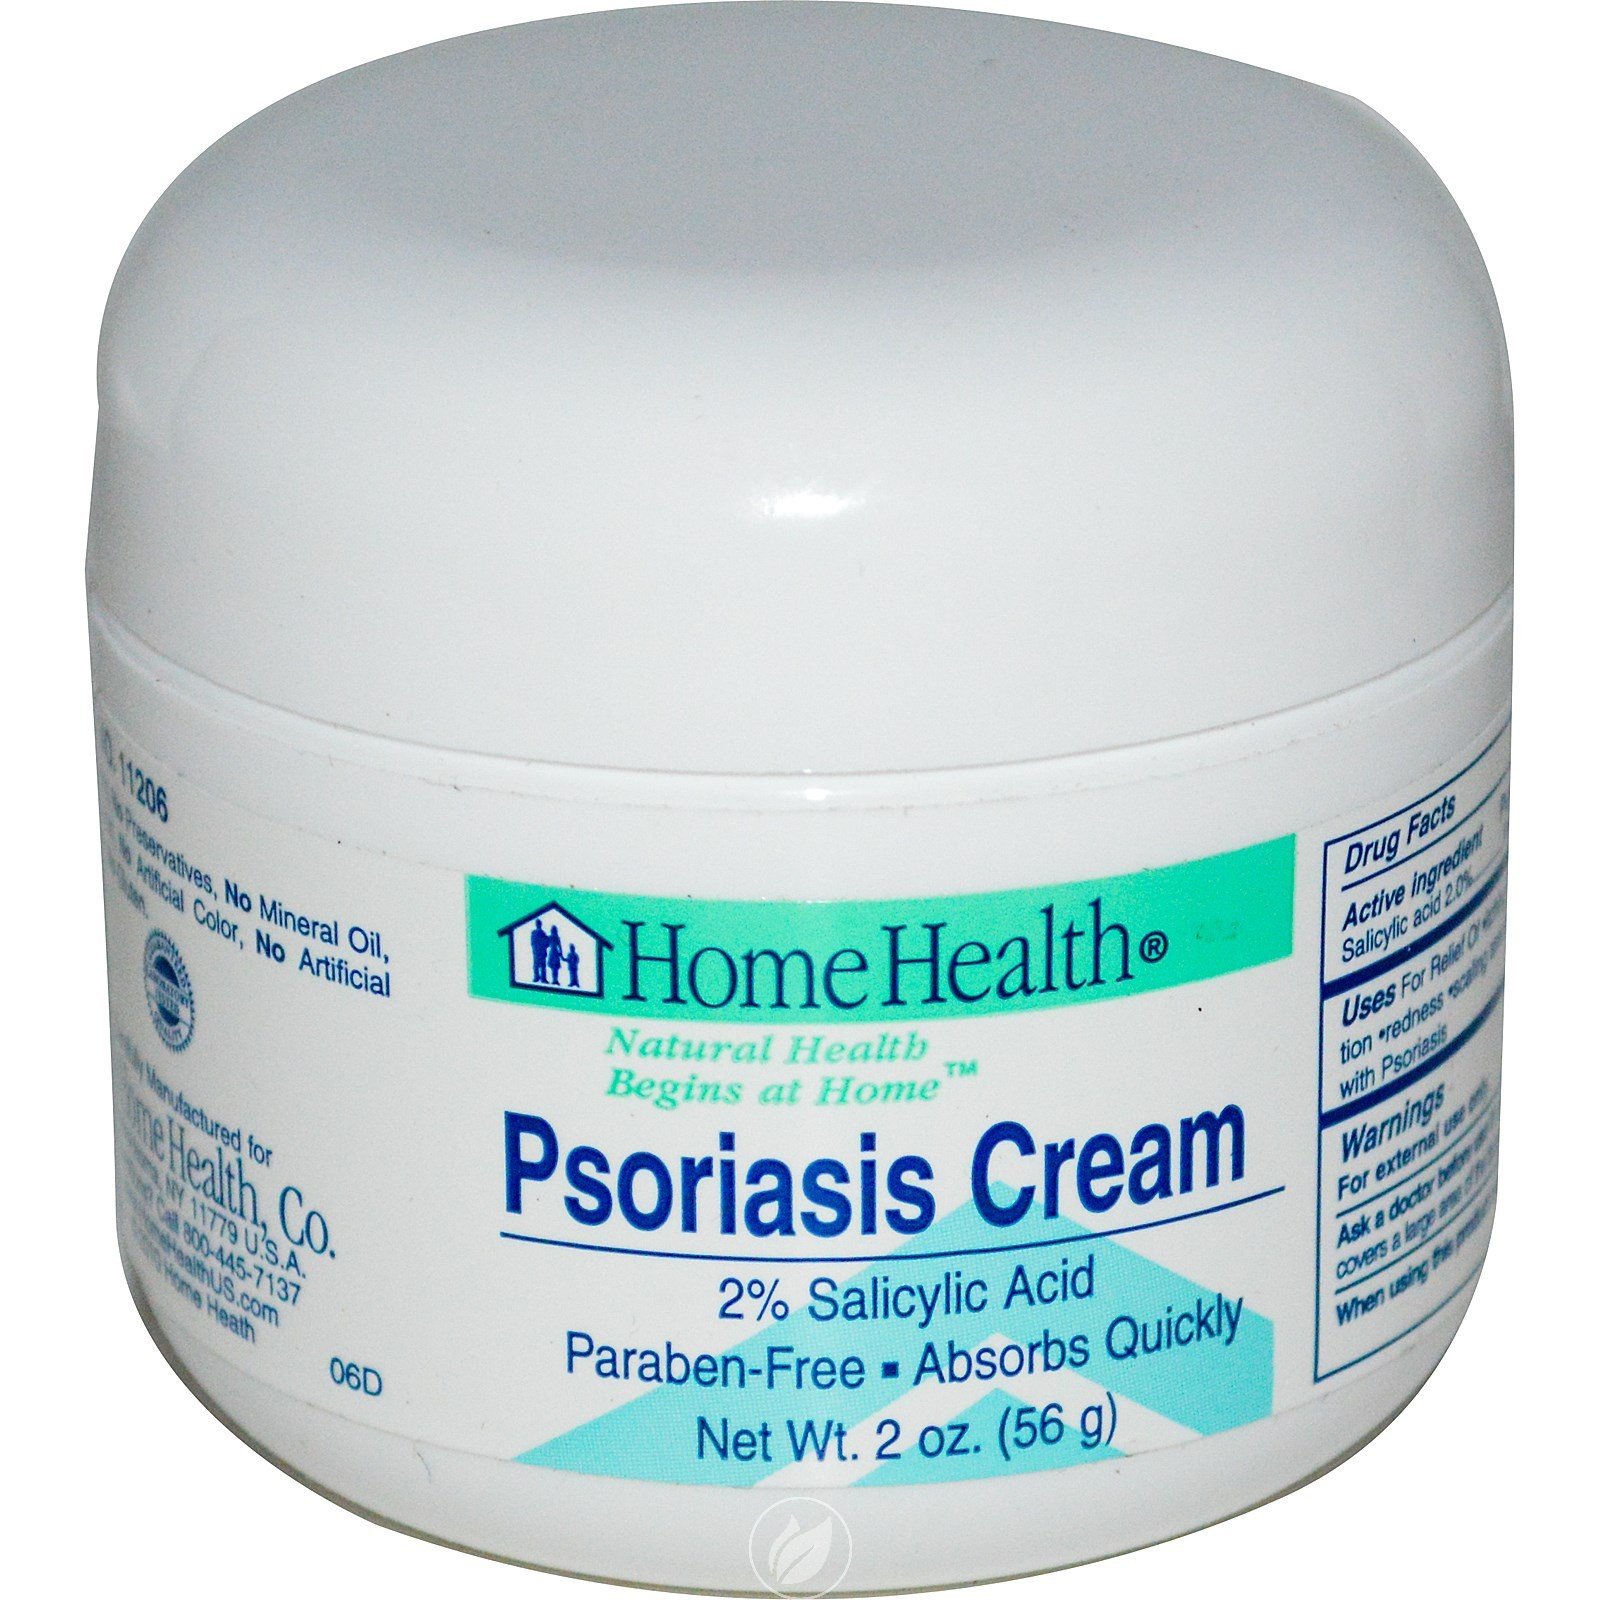 Psoriasis Cream 2 FL Oz by Home Health, Pack of 2 ...